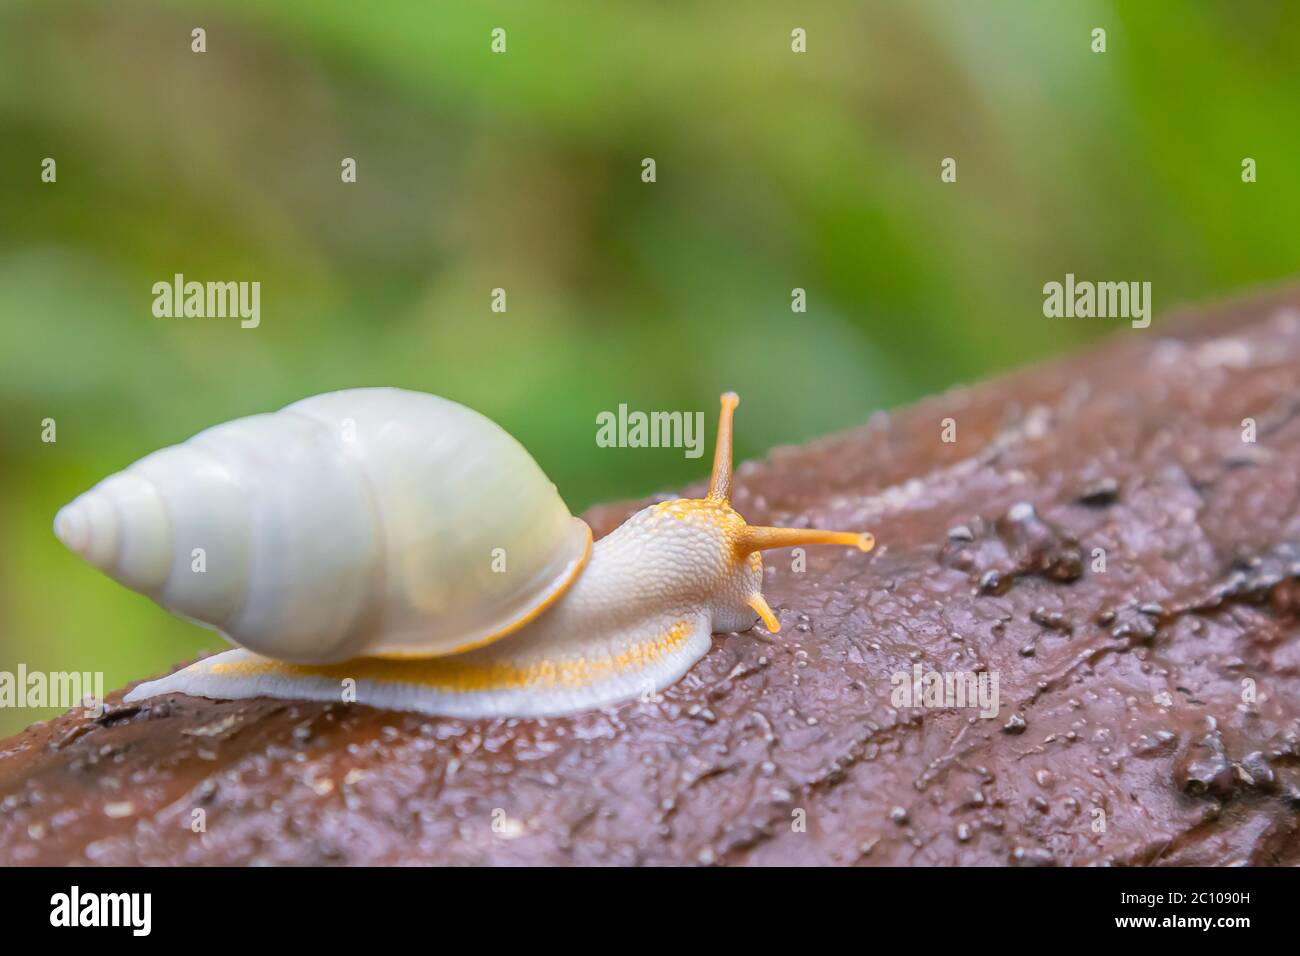 White snail crawling in tropical forest on artificial wood by concrete Stock Photo